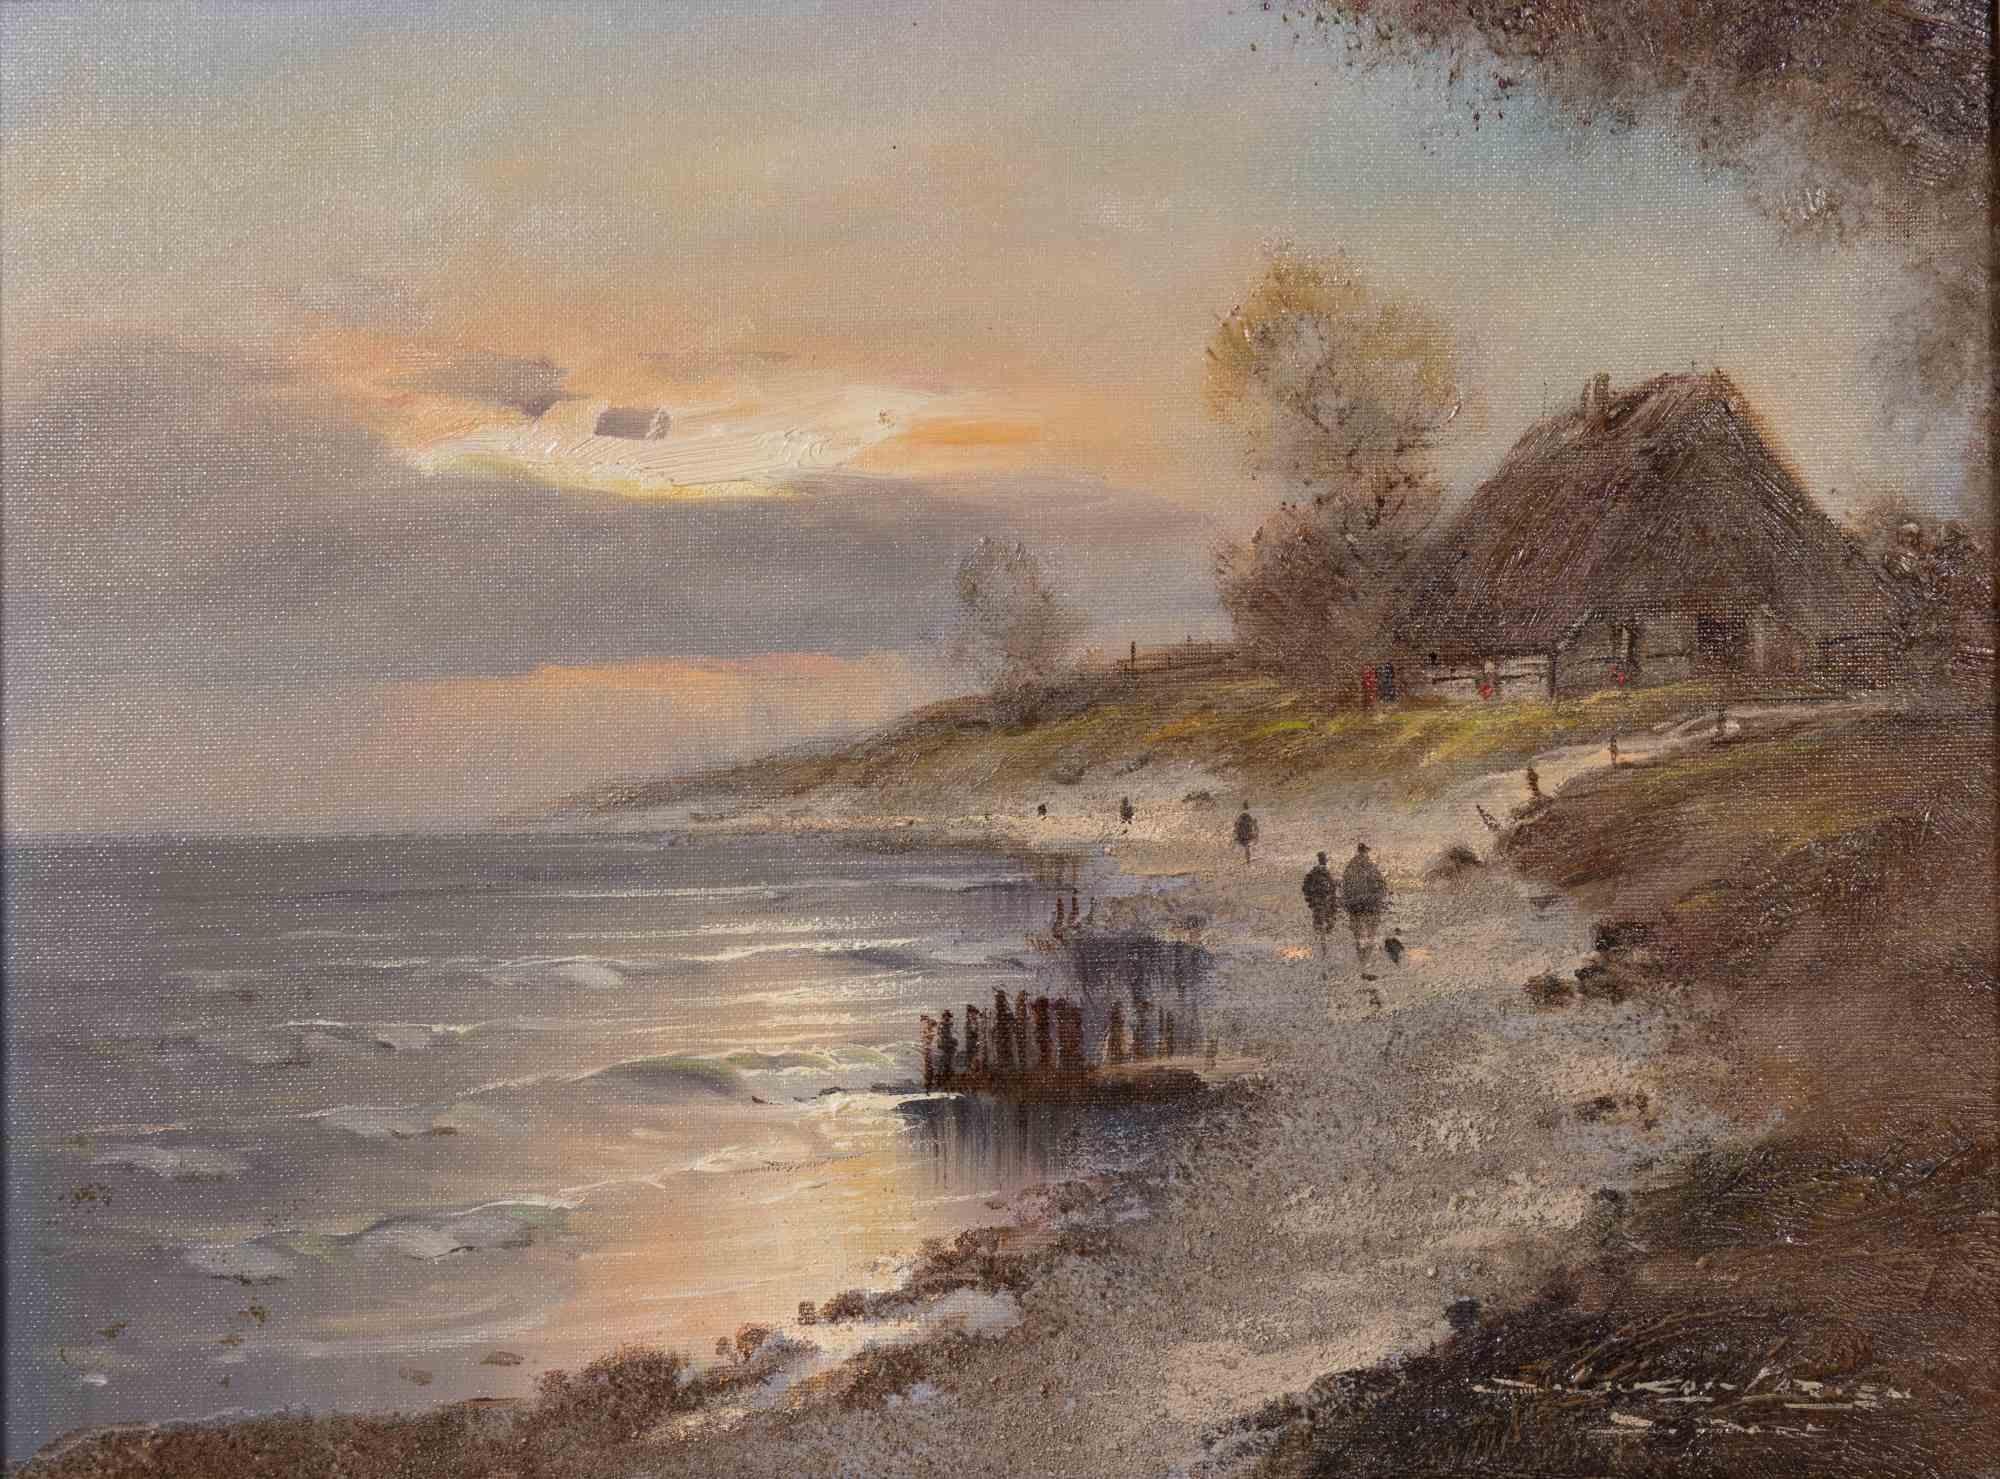 Evening Atmosphere - Painting by D. Lukas-Larsen - Late 20th Century